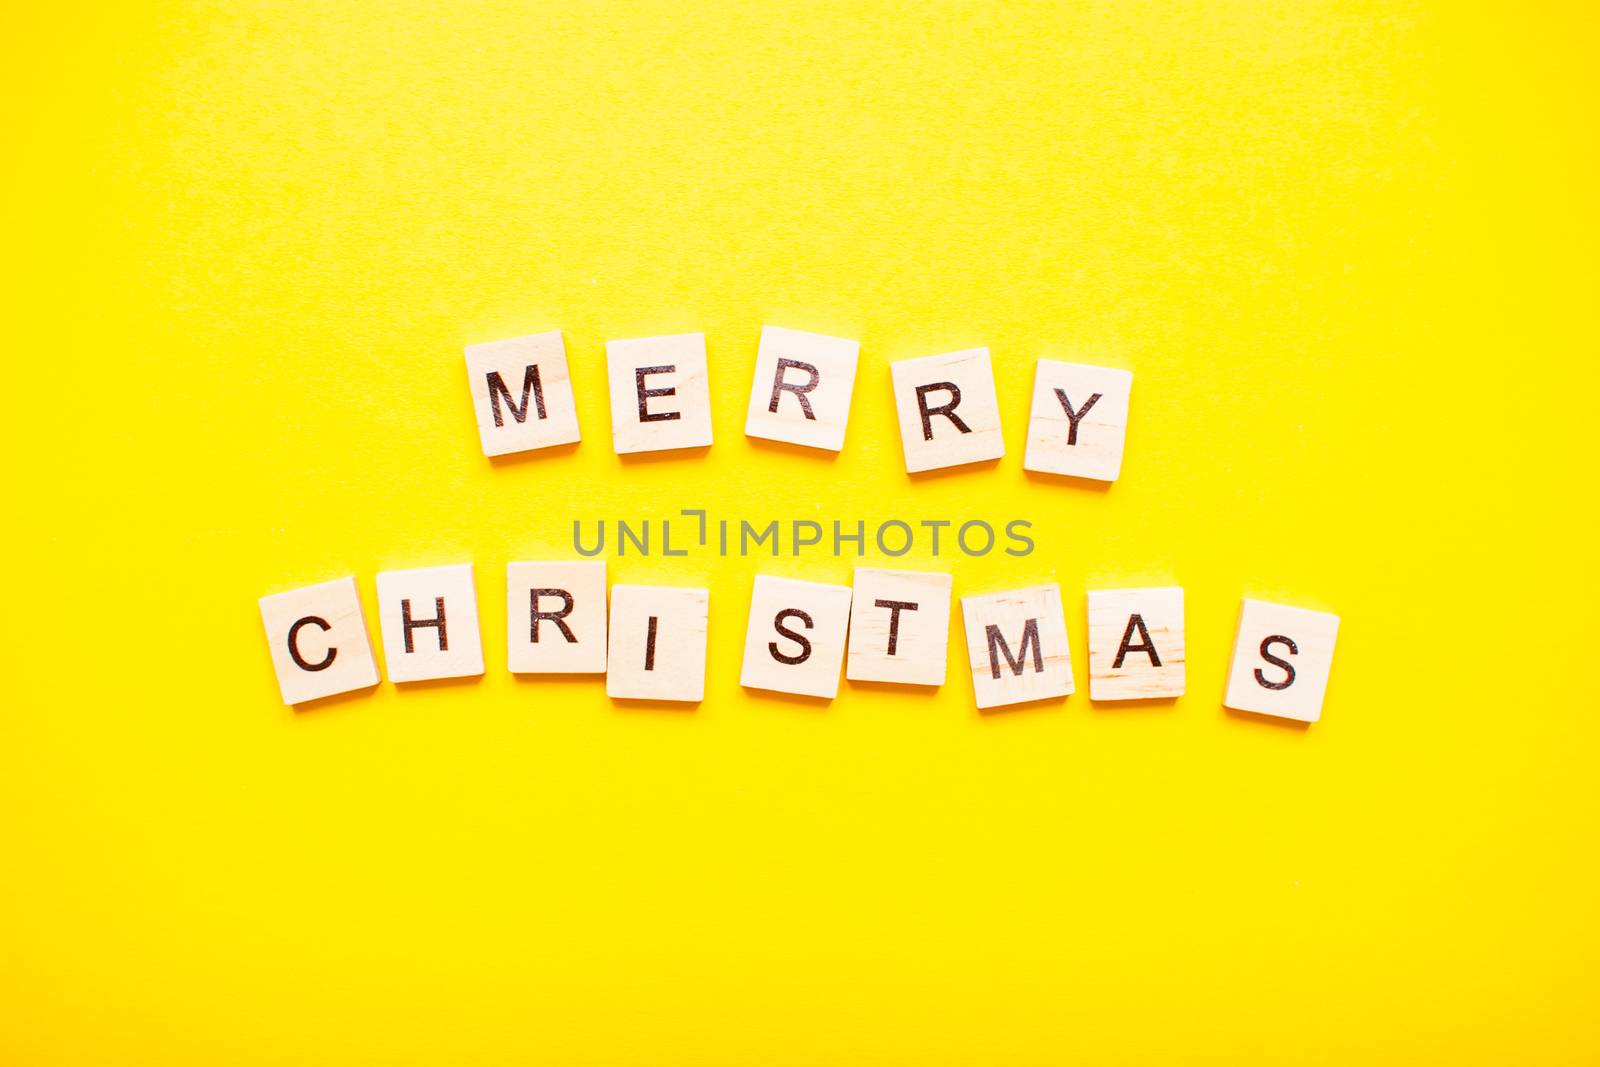 The inscription merry christmas made of wooden blocks on a light yellow background.